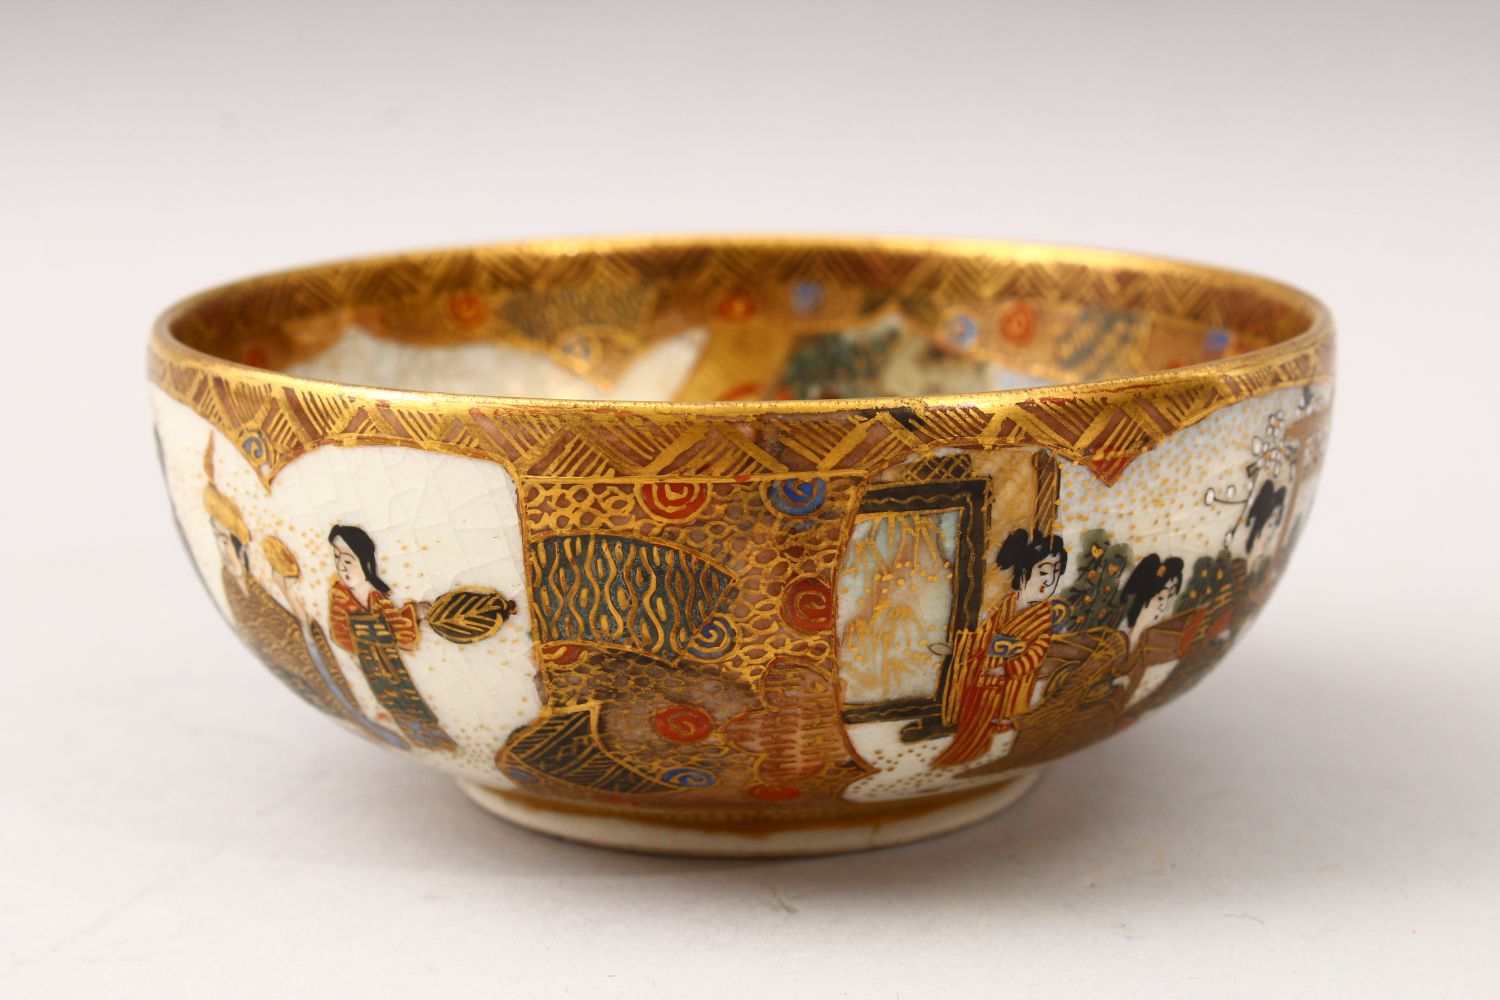 A JAPANESE MEIJI PERIOD SATSUMA IMMORTAL BOWL, the interior of the bowl decorated with scenes of - Image 2 of 7